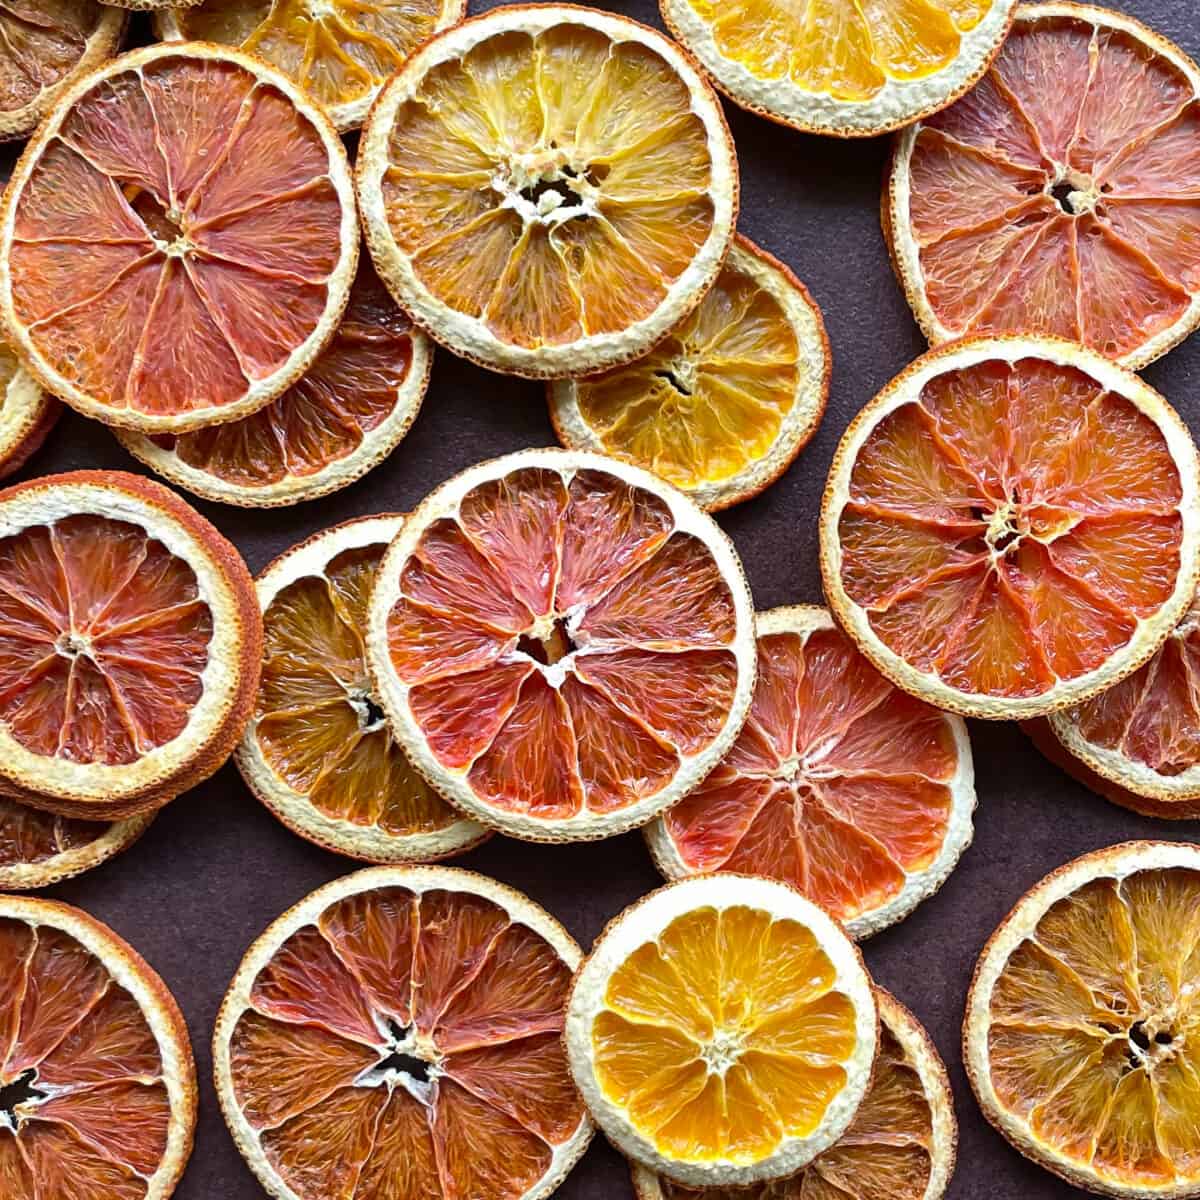 How To Store Dried Orange Slices